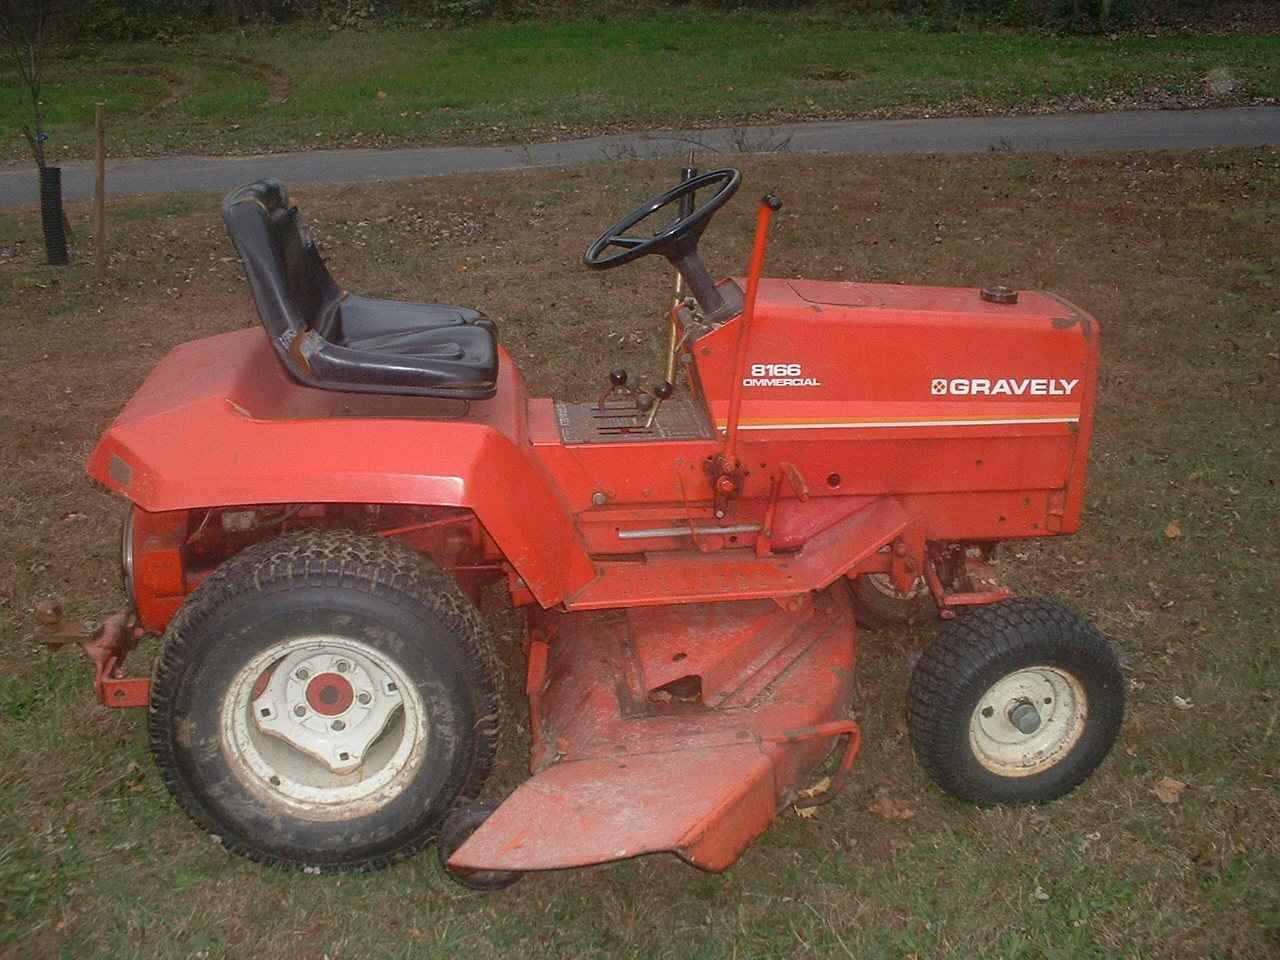 This Tractor has been sold.